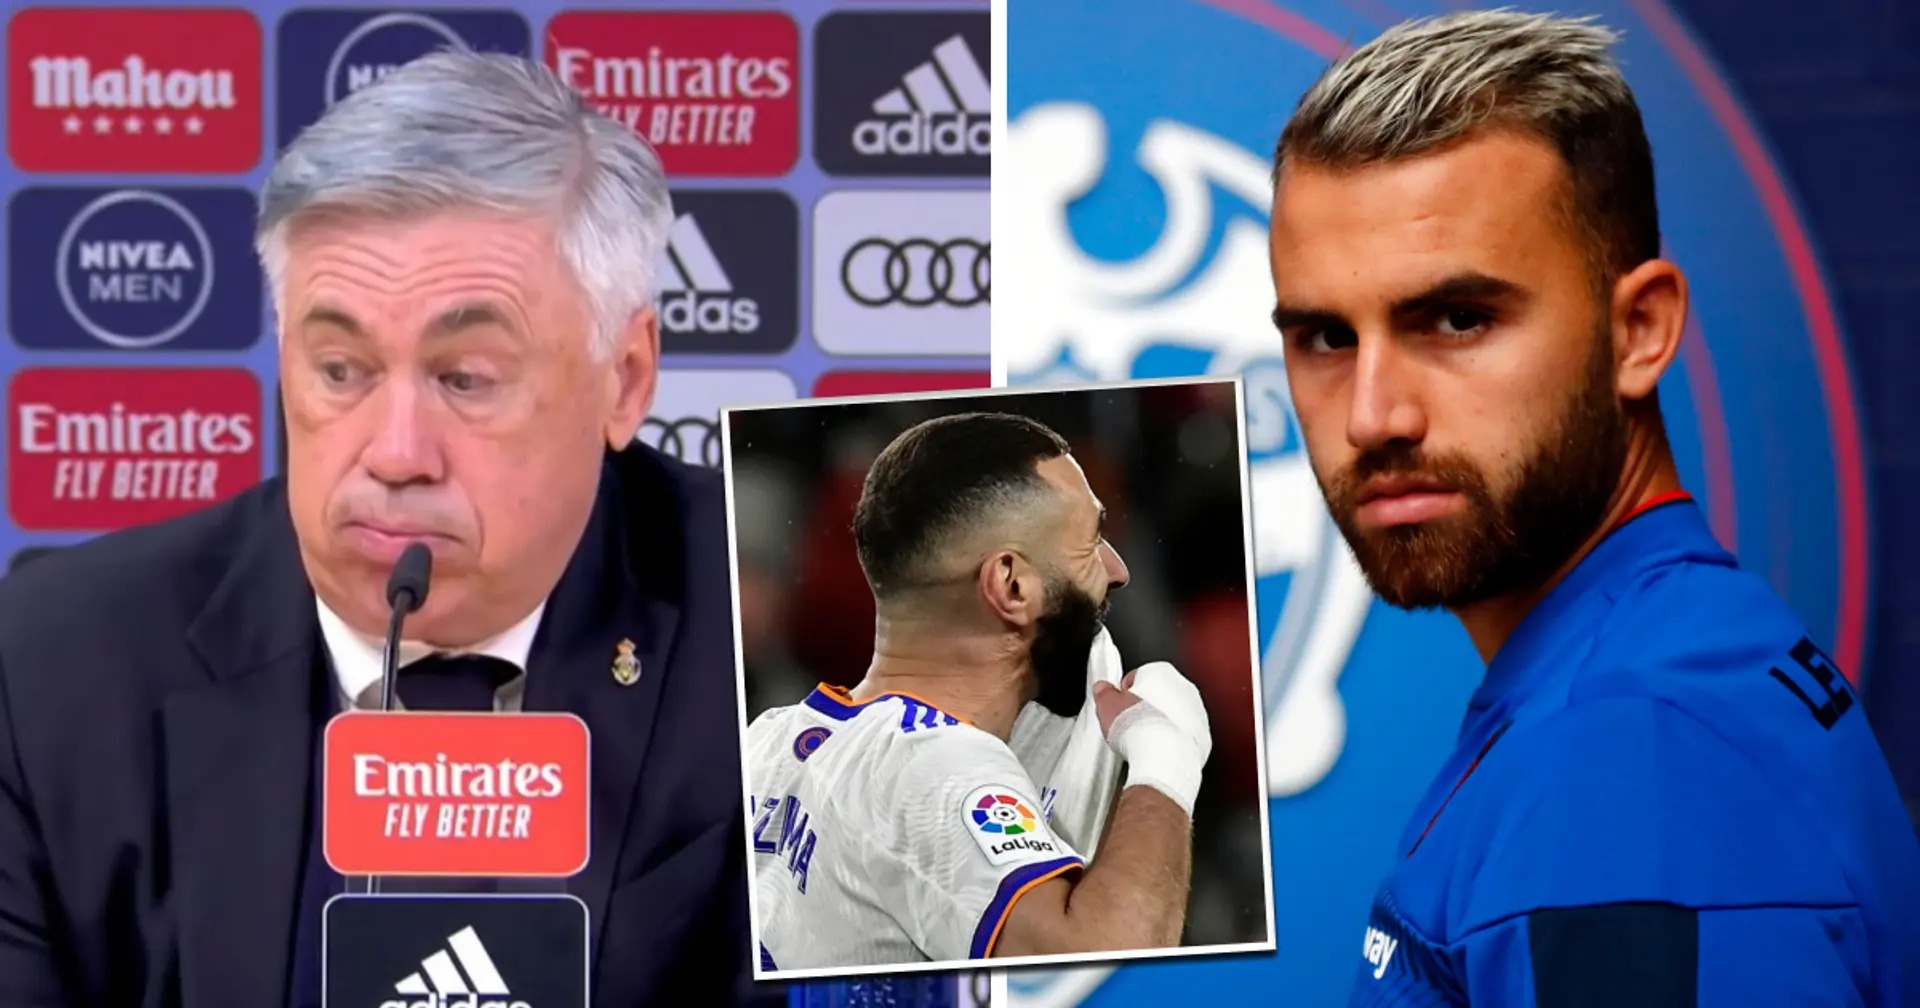 Ancelotti 'dissatisfied' with Madrid's back-up for Benzema, wants new striker